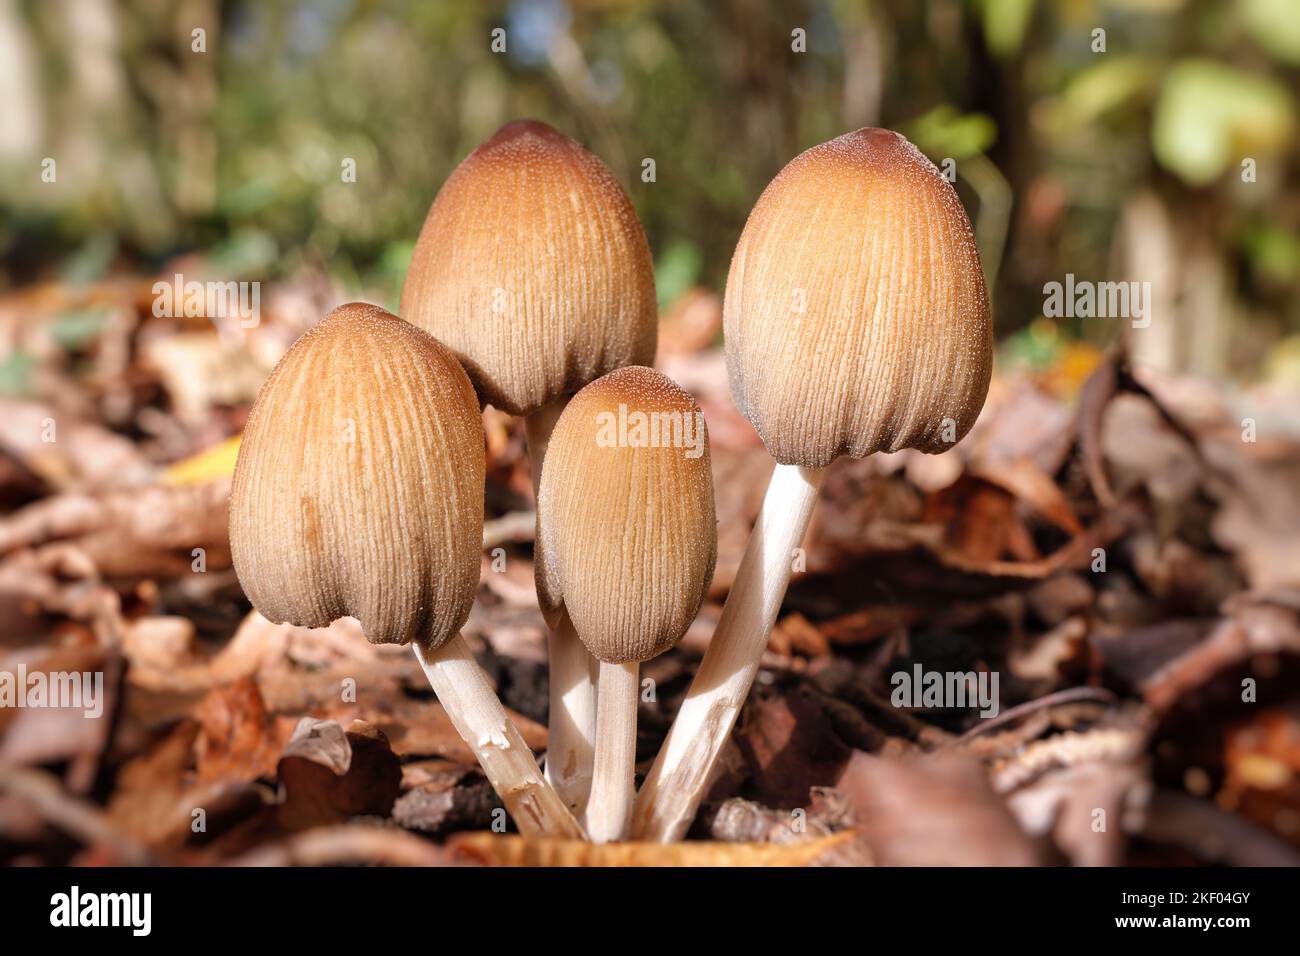 The Glistening Inkcap, Coprinellus micaceus (formerly coprinus micaceus) with the typical glistening crystals that give this fungus its common name Stock Photo